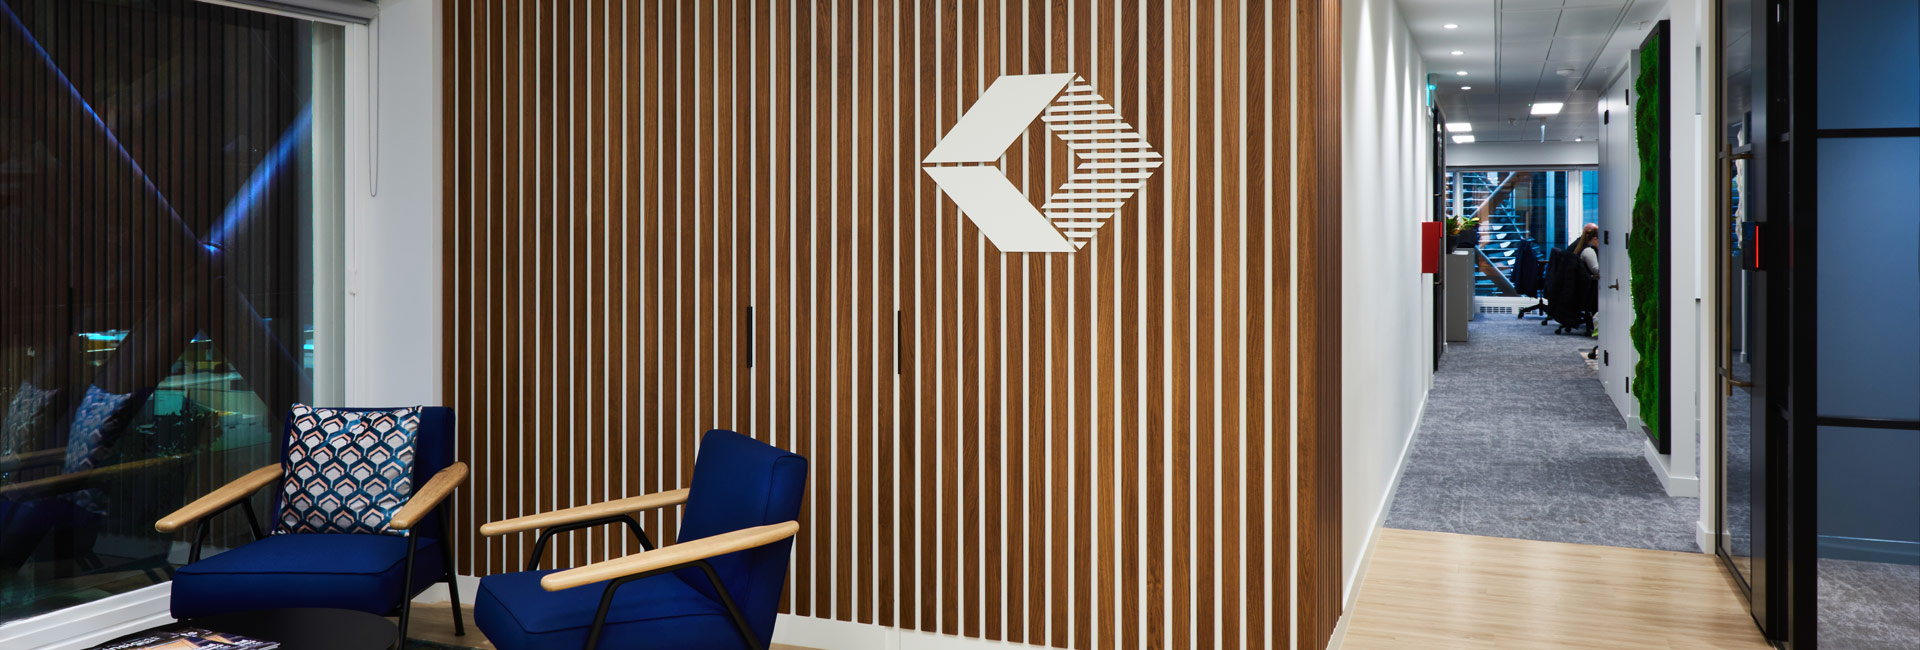 Feature wall with Structure Tone logo